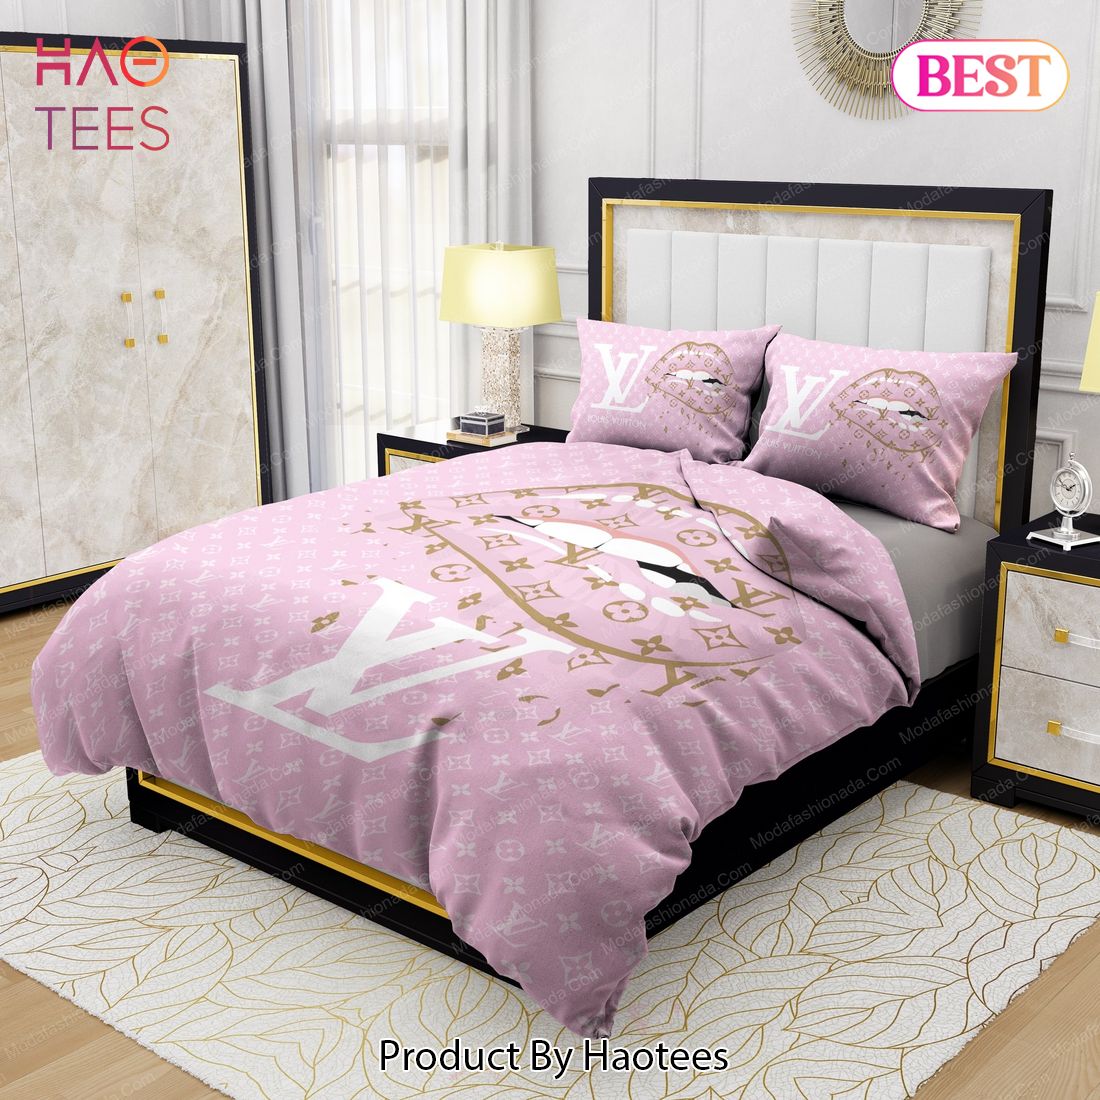 Buy Lips With Louis Vuitton Pattern Bedding Sets Bed Sets, Bedroom